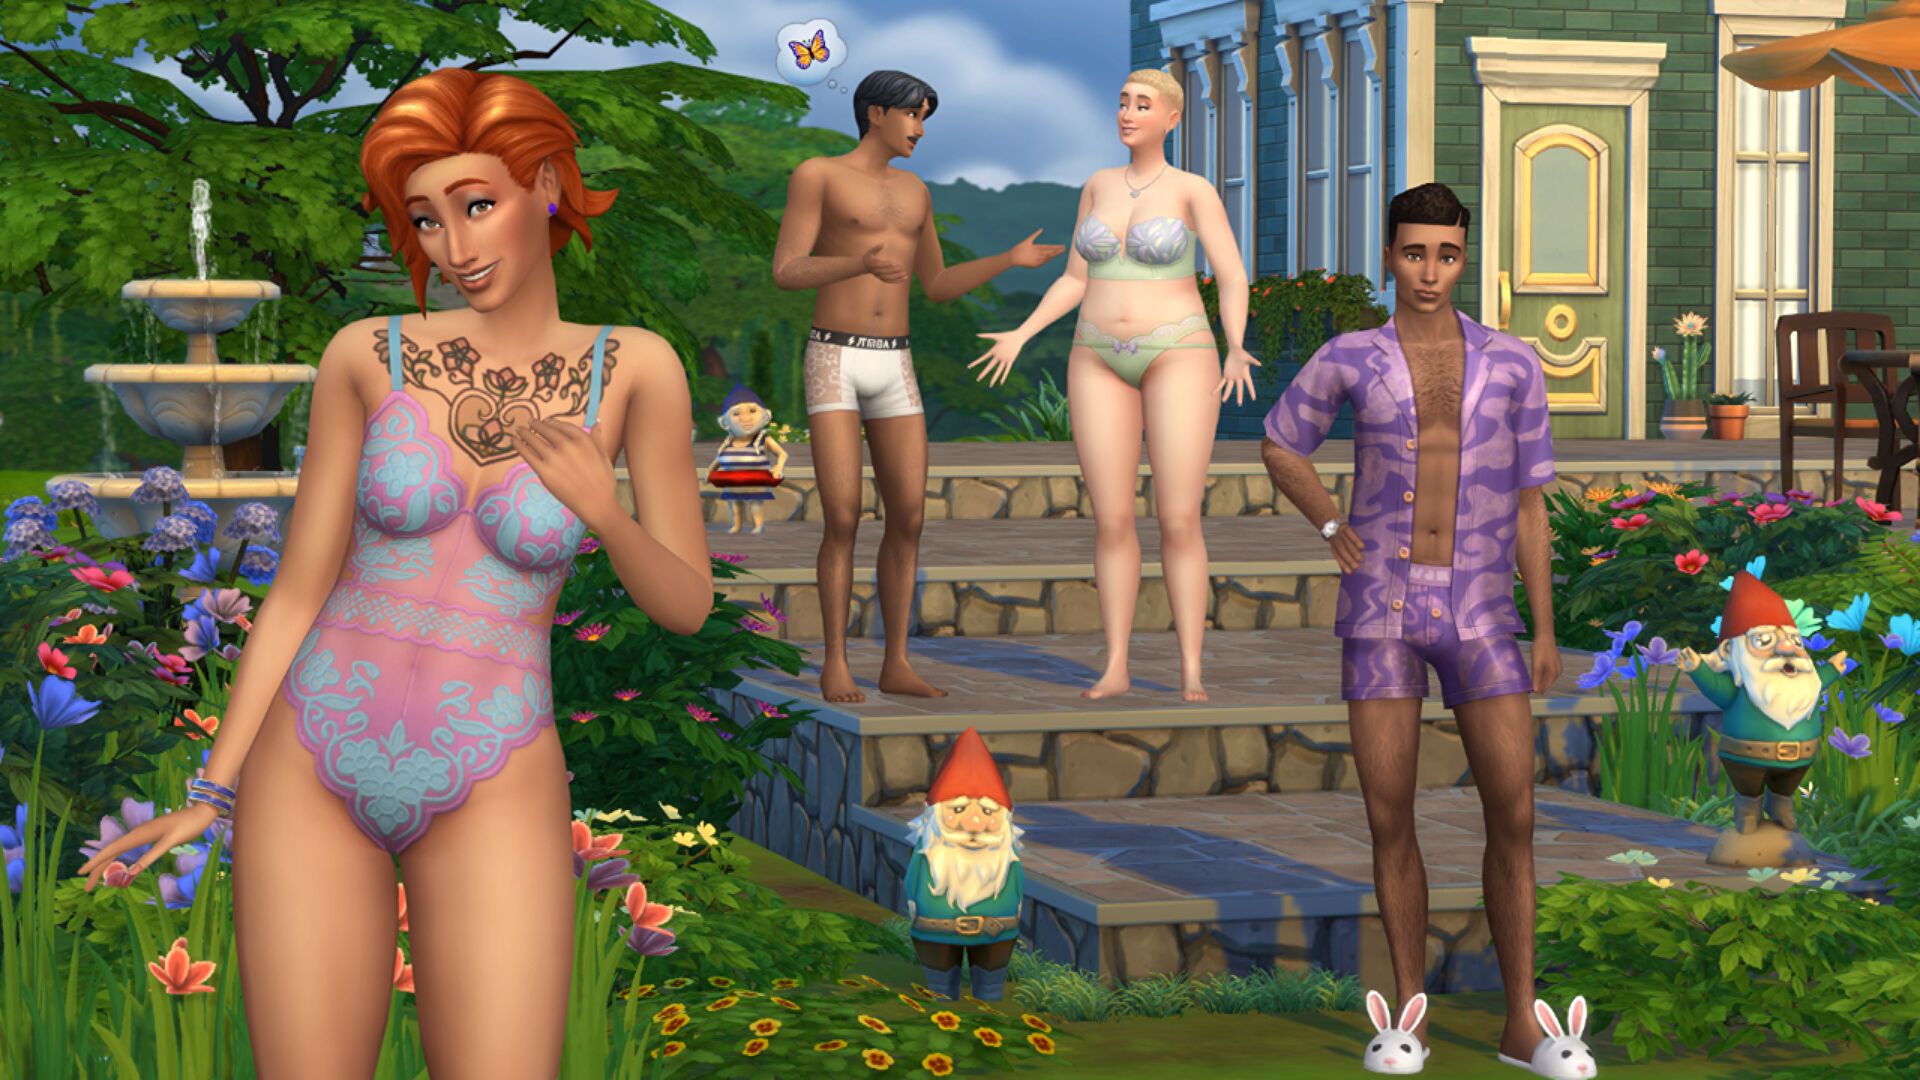 The Sims 4 reveals two new kits for your Sims bathrooms and bedrooms